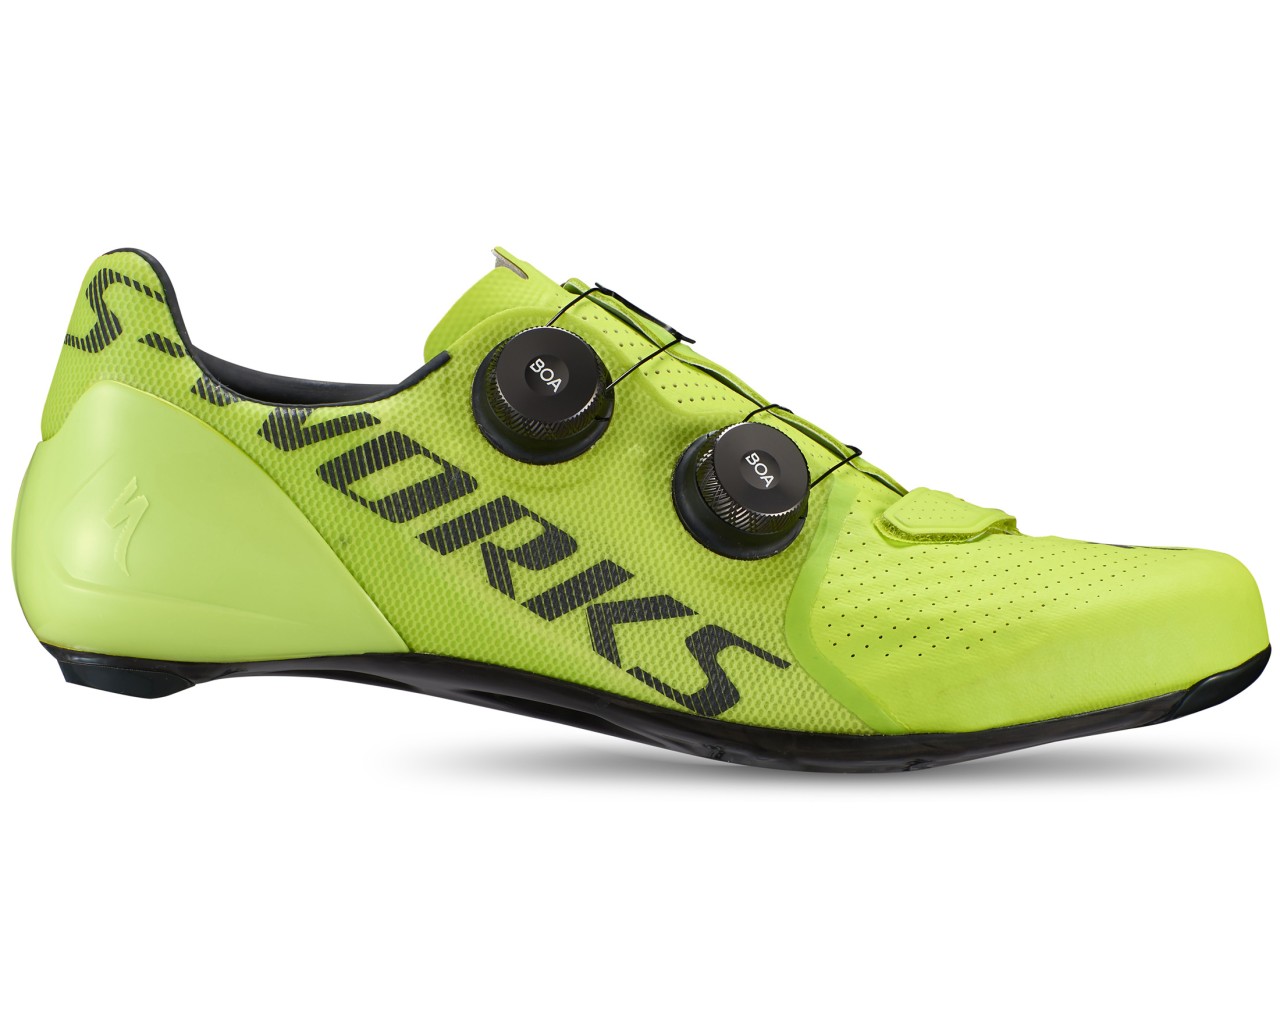 Specialized S-Works 7 Road Bike Shoes | hyper